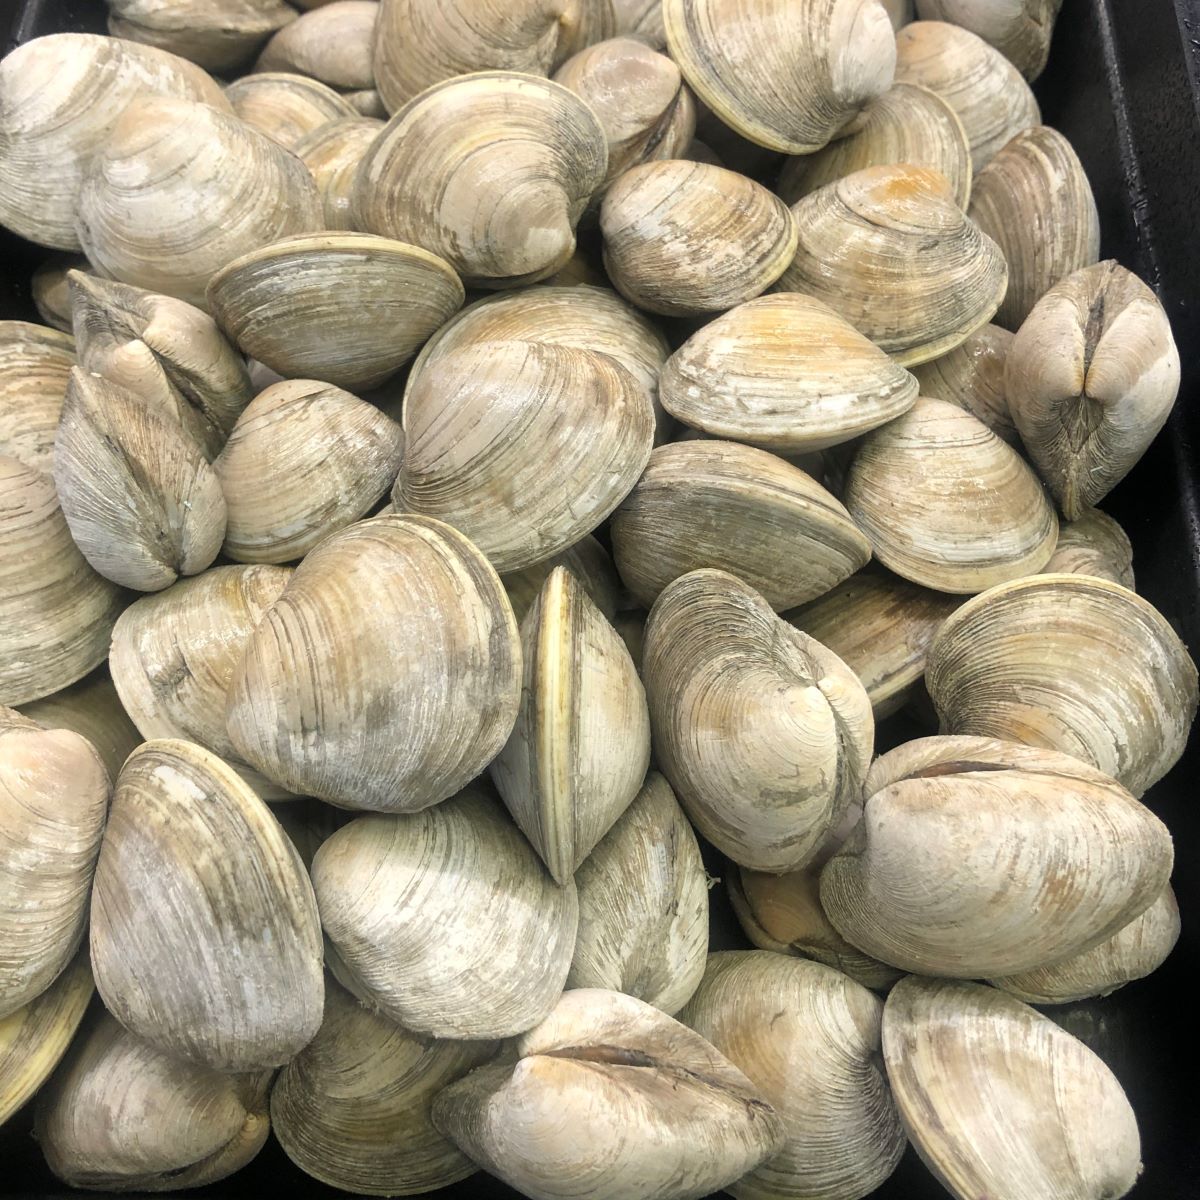 How To Store Little Neck Clams